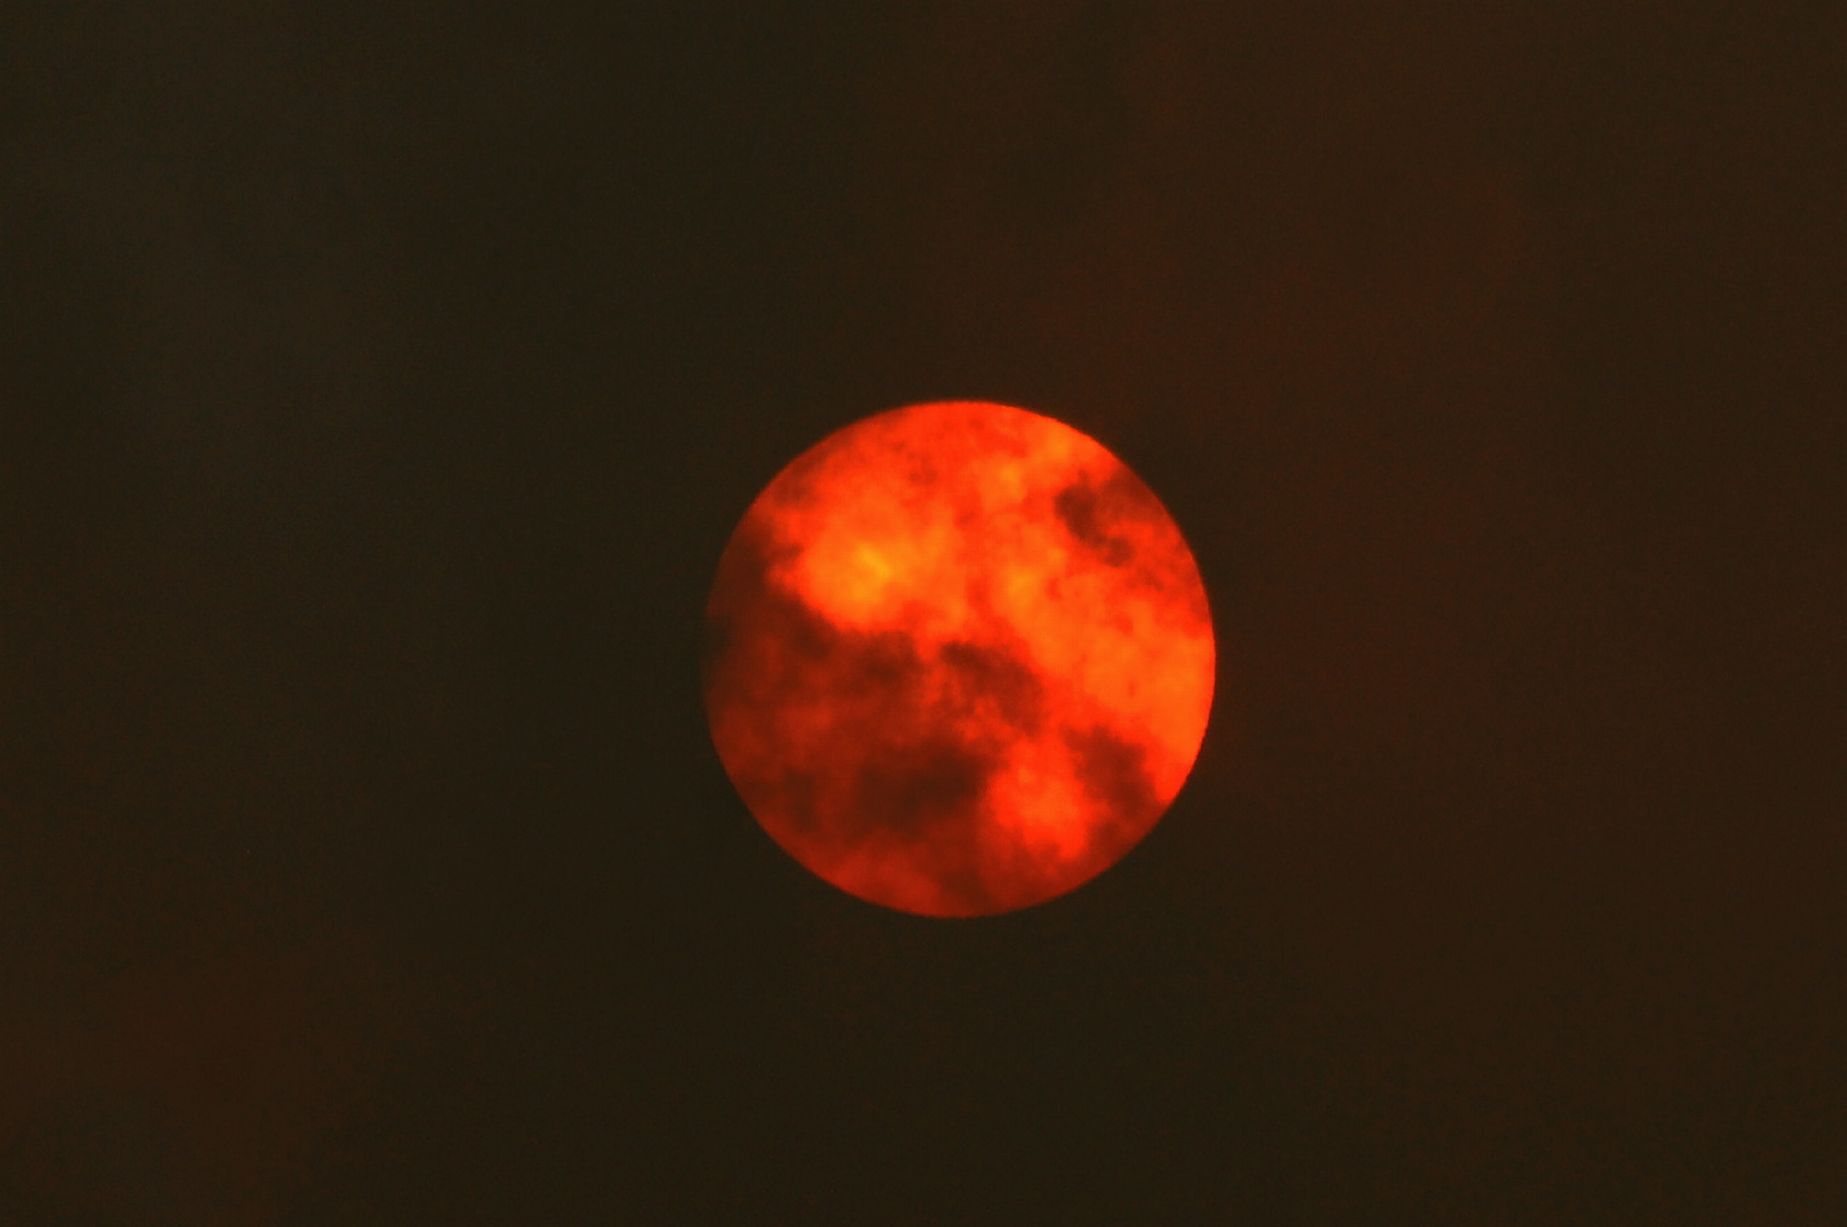 Picture gallery: The red sun in Gloucestershire - Gloucestershire Live